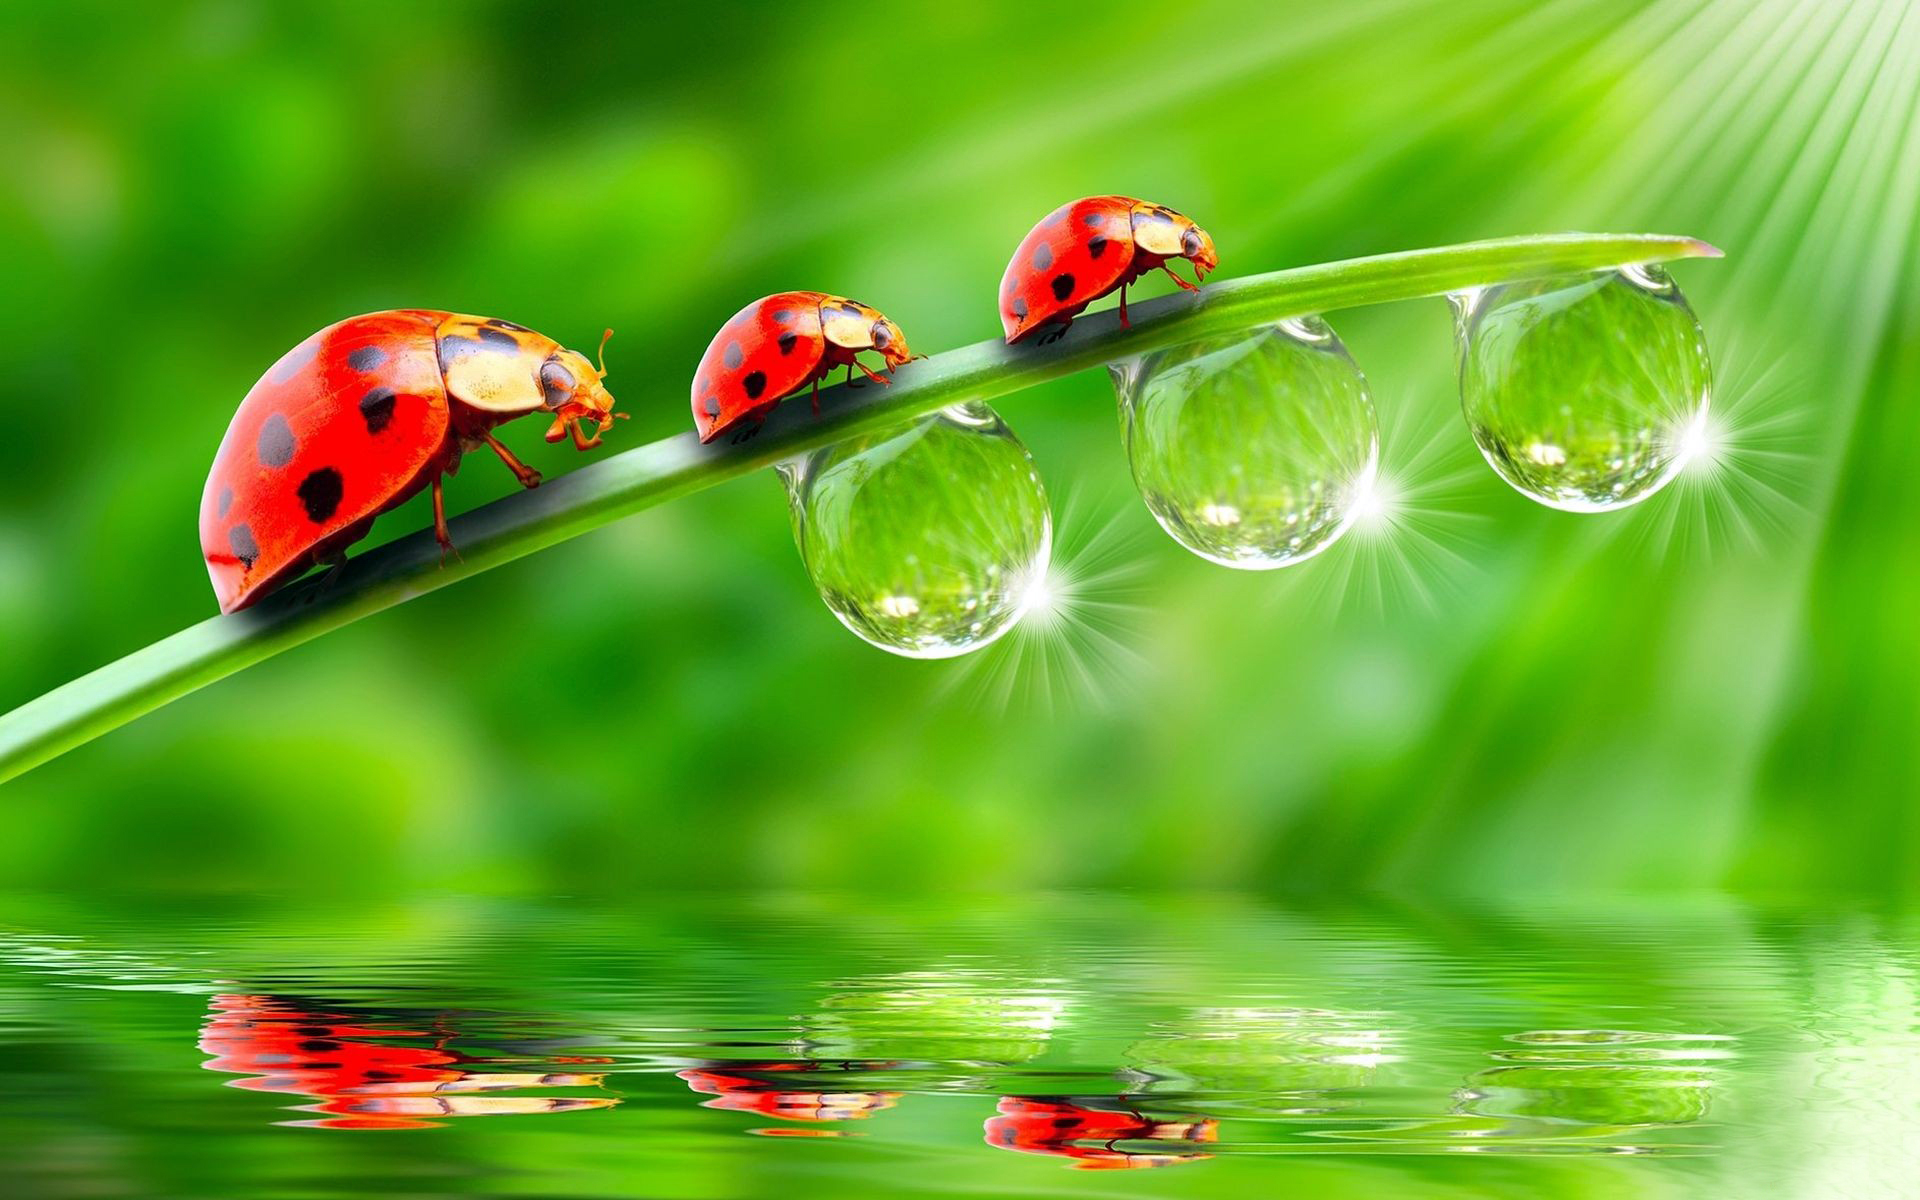 Ladybugs wallpapers and images - download wallpapers, pictures, photos | Smiles | Pinterest